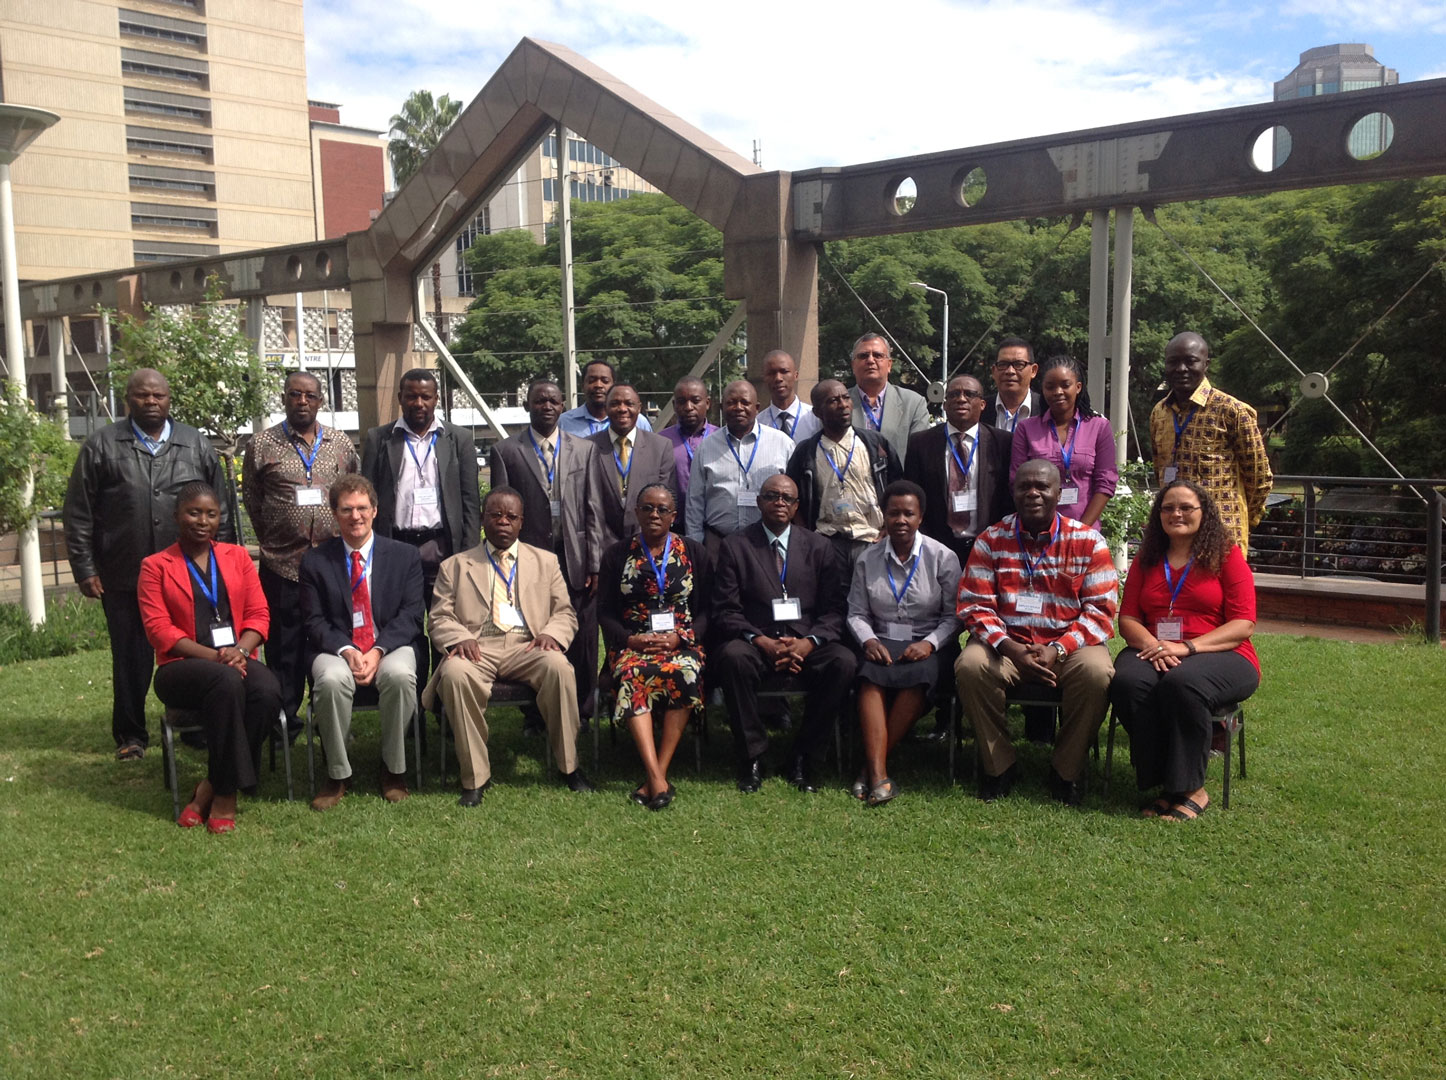 © 2014 AU-IBAR. Group photo of all the participants Workshop "Strengthening Regional Capacities for the Sustainable Use of Animal Genetic Resources in Southern Africa".